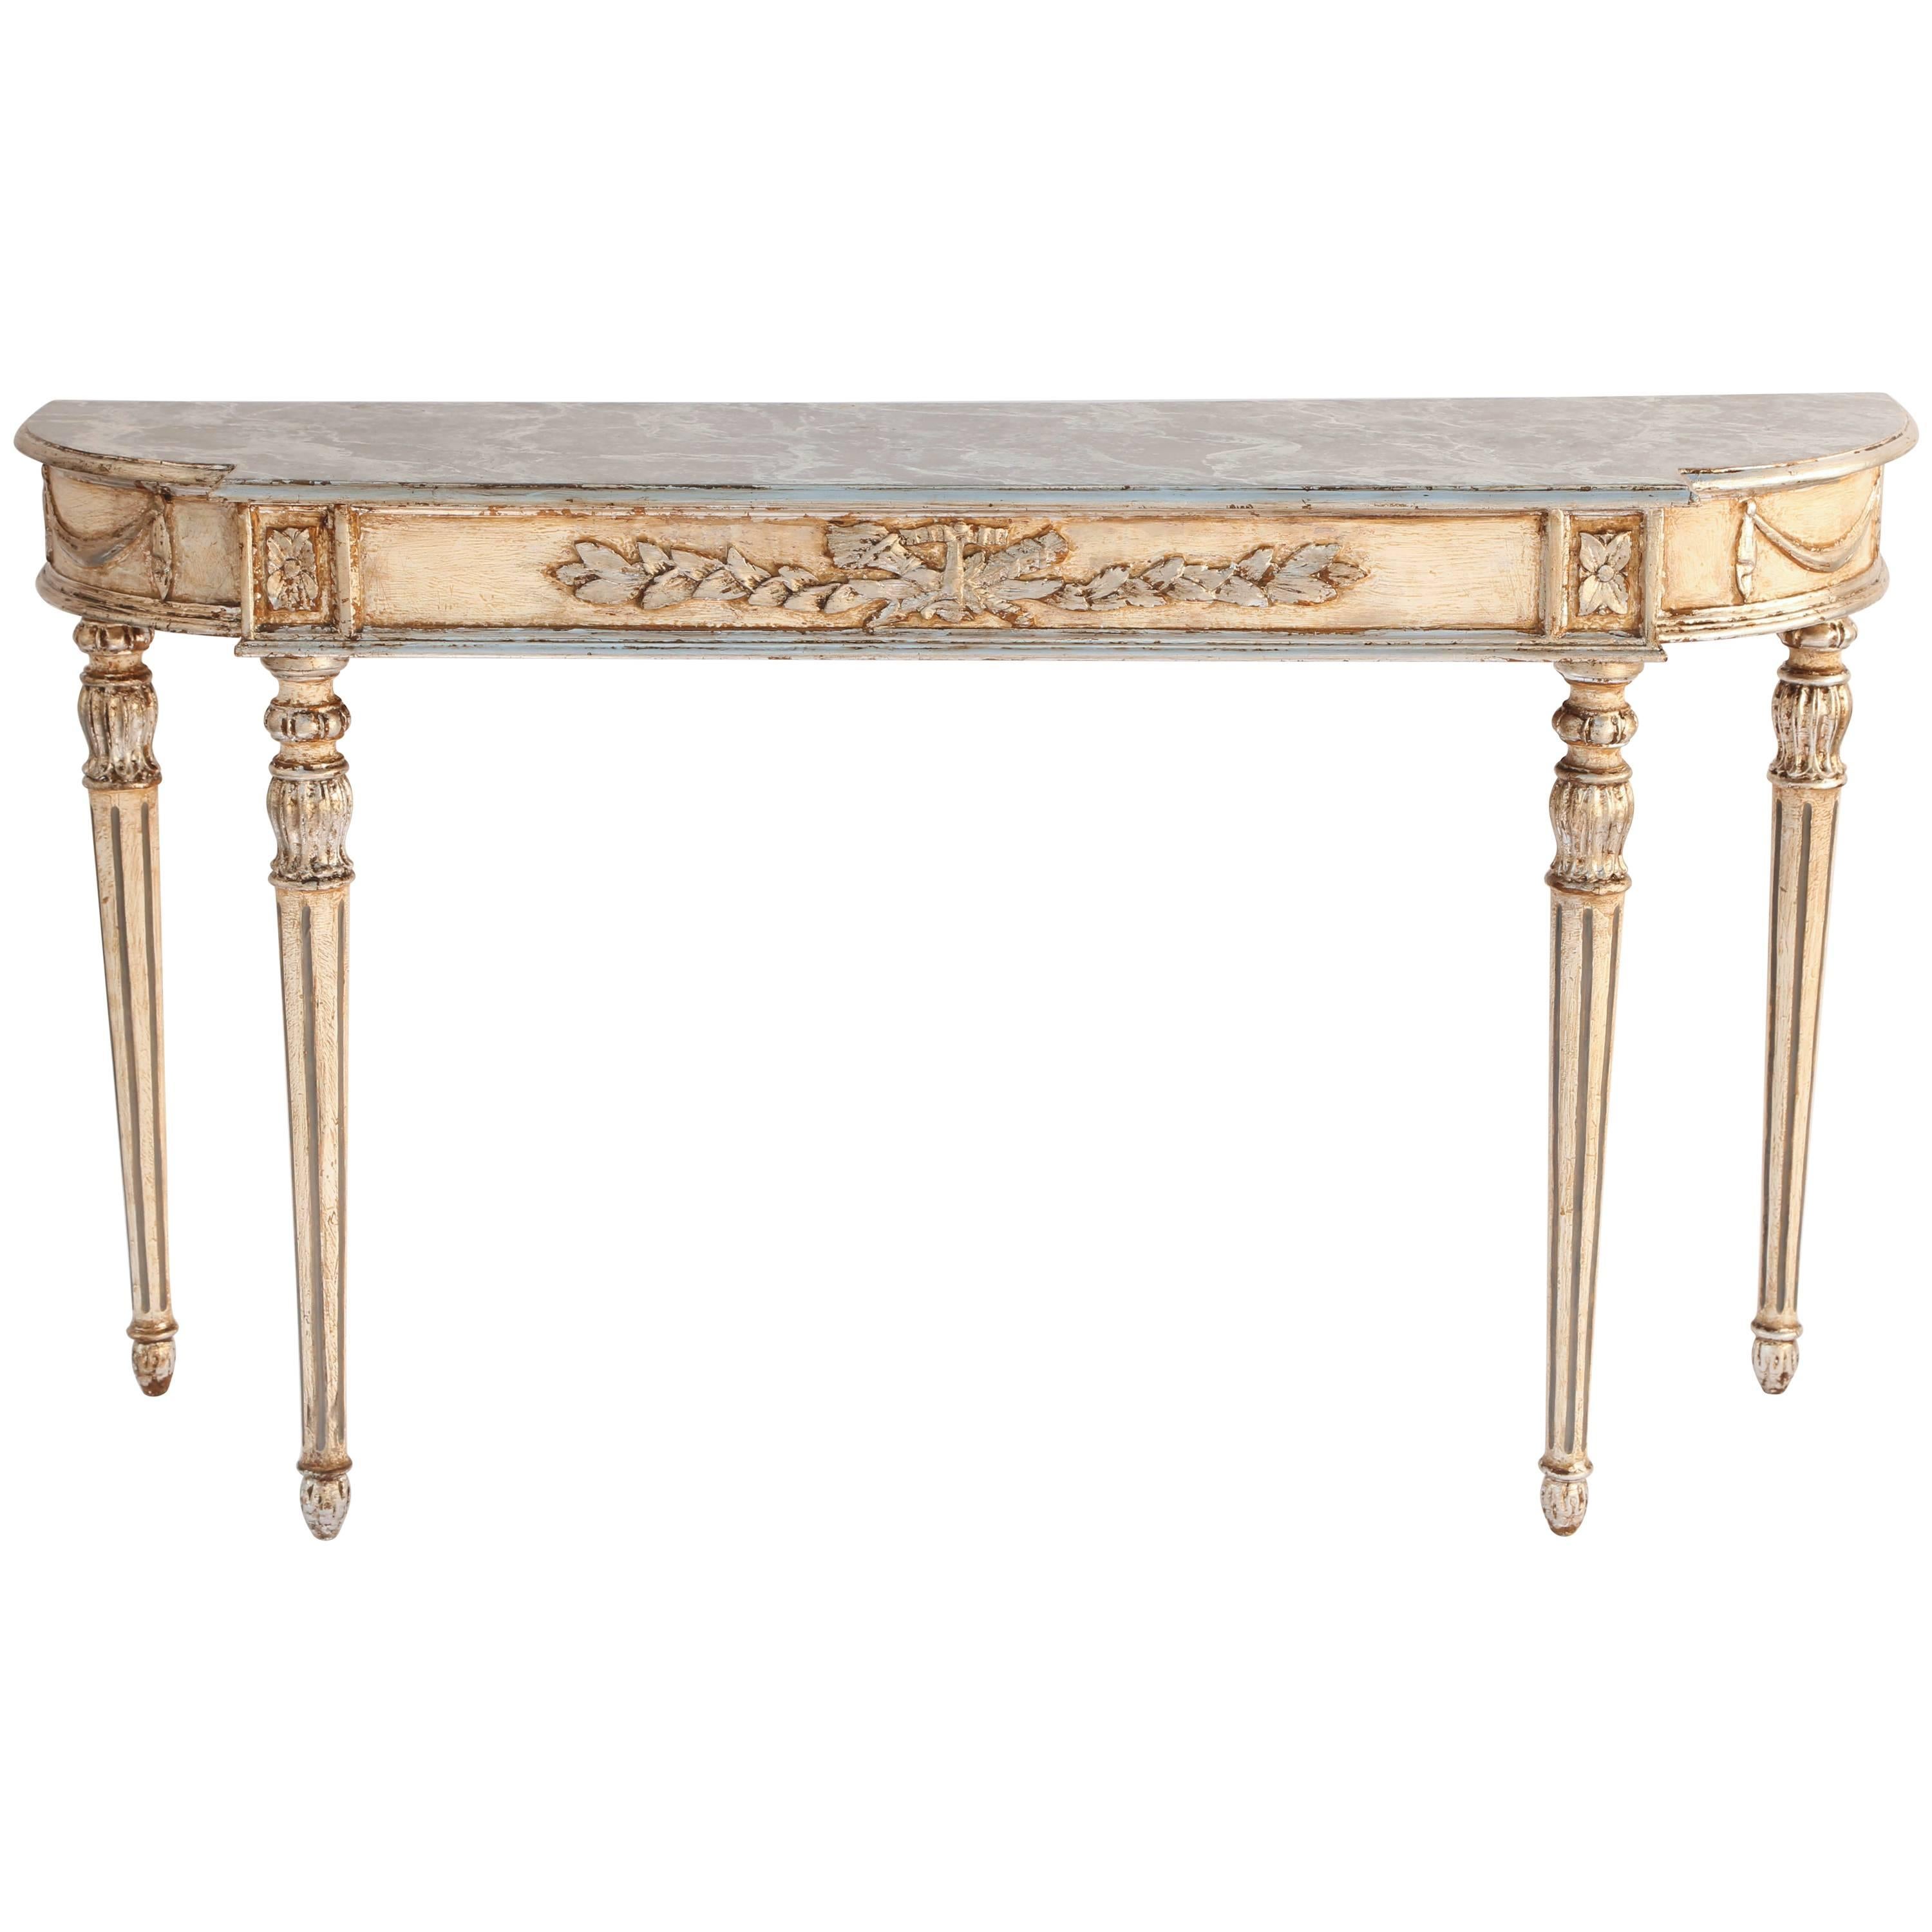 Italian Painted and Parcel Gilt Louis XVI Console with Faux Marble Top